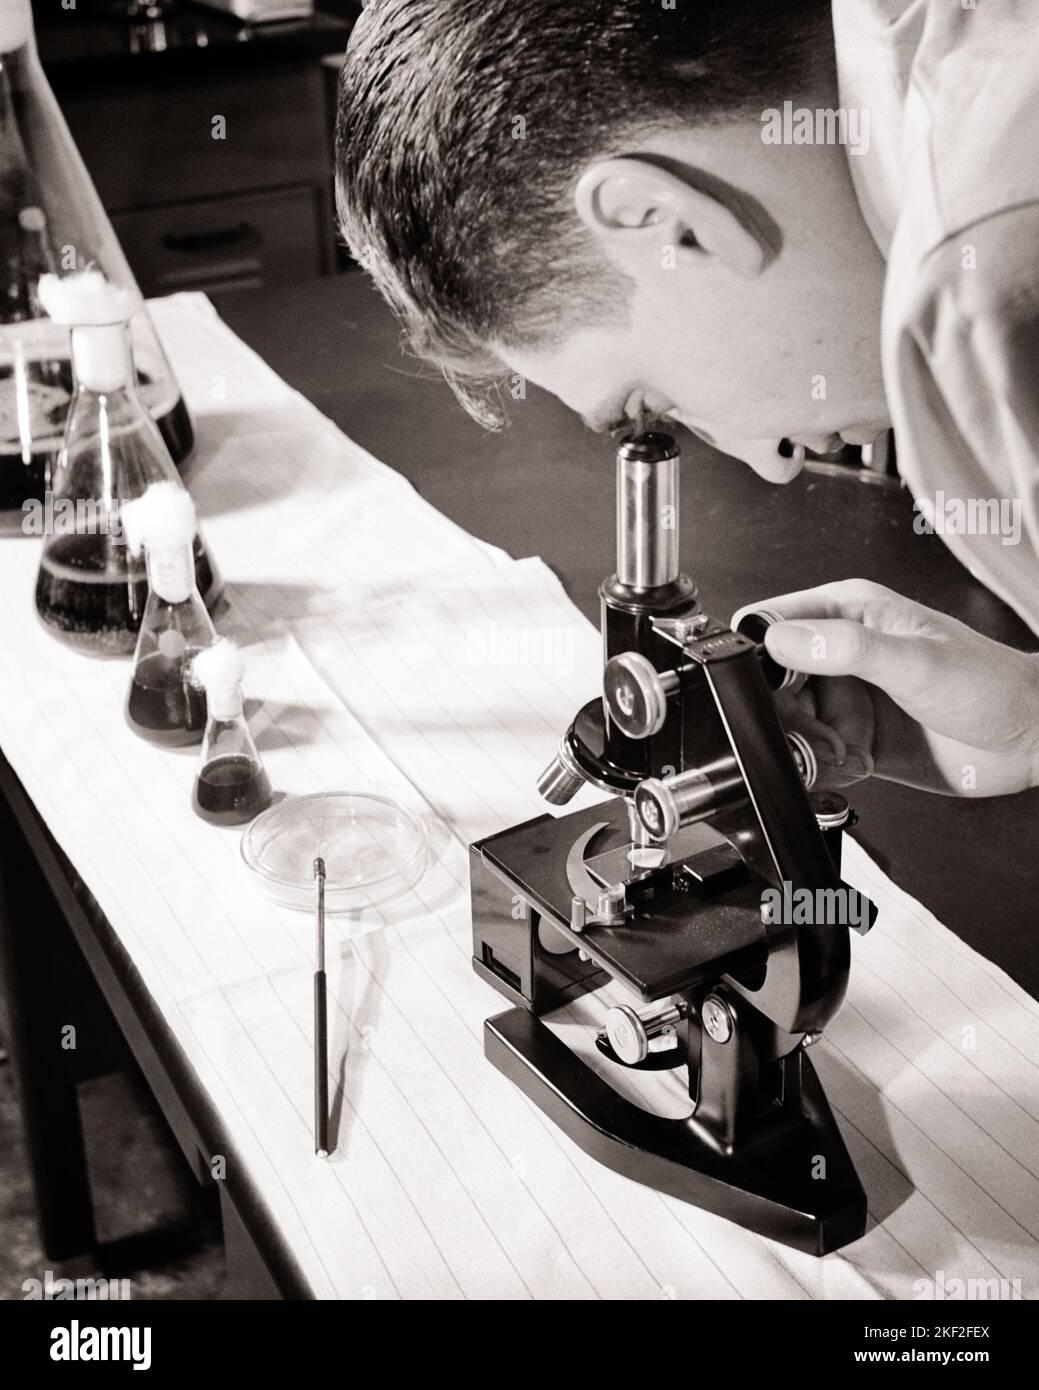 1950s ANONYMOUS MAN SCIENTIST LOOKING AT SLIDE IN MICROSCOPE AND WITH VARIOUS SIZES OF FLASKS WITH MEASURED AMOUNTS OF LIQUID  - l581 HAR001 HARS ADVENTURE DISCOVERY SCIENTIFIC AND PROGRESS INNOVATION MEASURED OCCUPATIONS CONCEPTUAL VARIOUS ANONYMOUS PHARMACOLOGY FLASKS MID-ADULT MID-ADULT MAN SOLUTIONS BLACK AND WHITE CAUCASIAN ETHNICITY HAR001 LABORATORIES LABS OLD FASHIONED SIZES Stock Photo